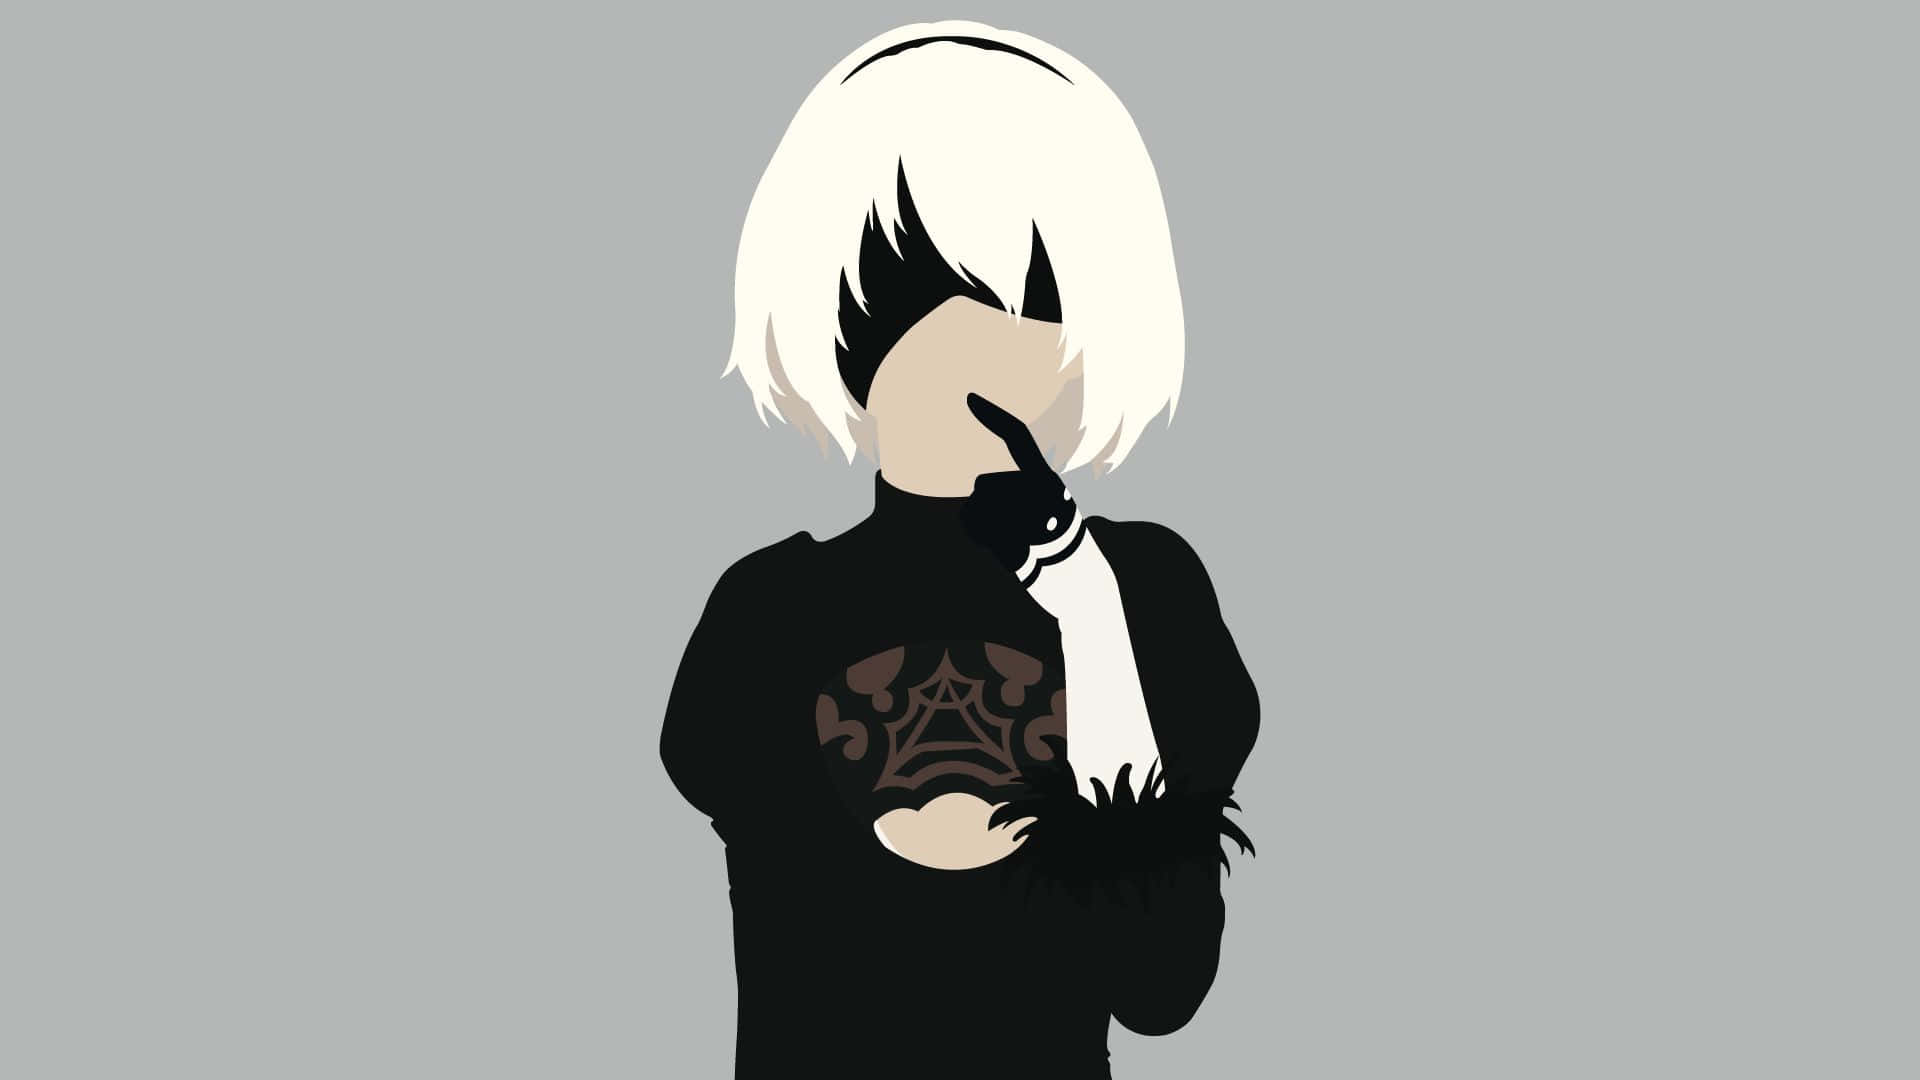 2B - Ready to Take On Any Challenge